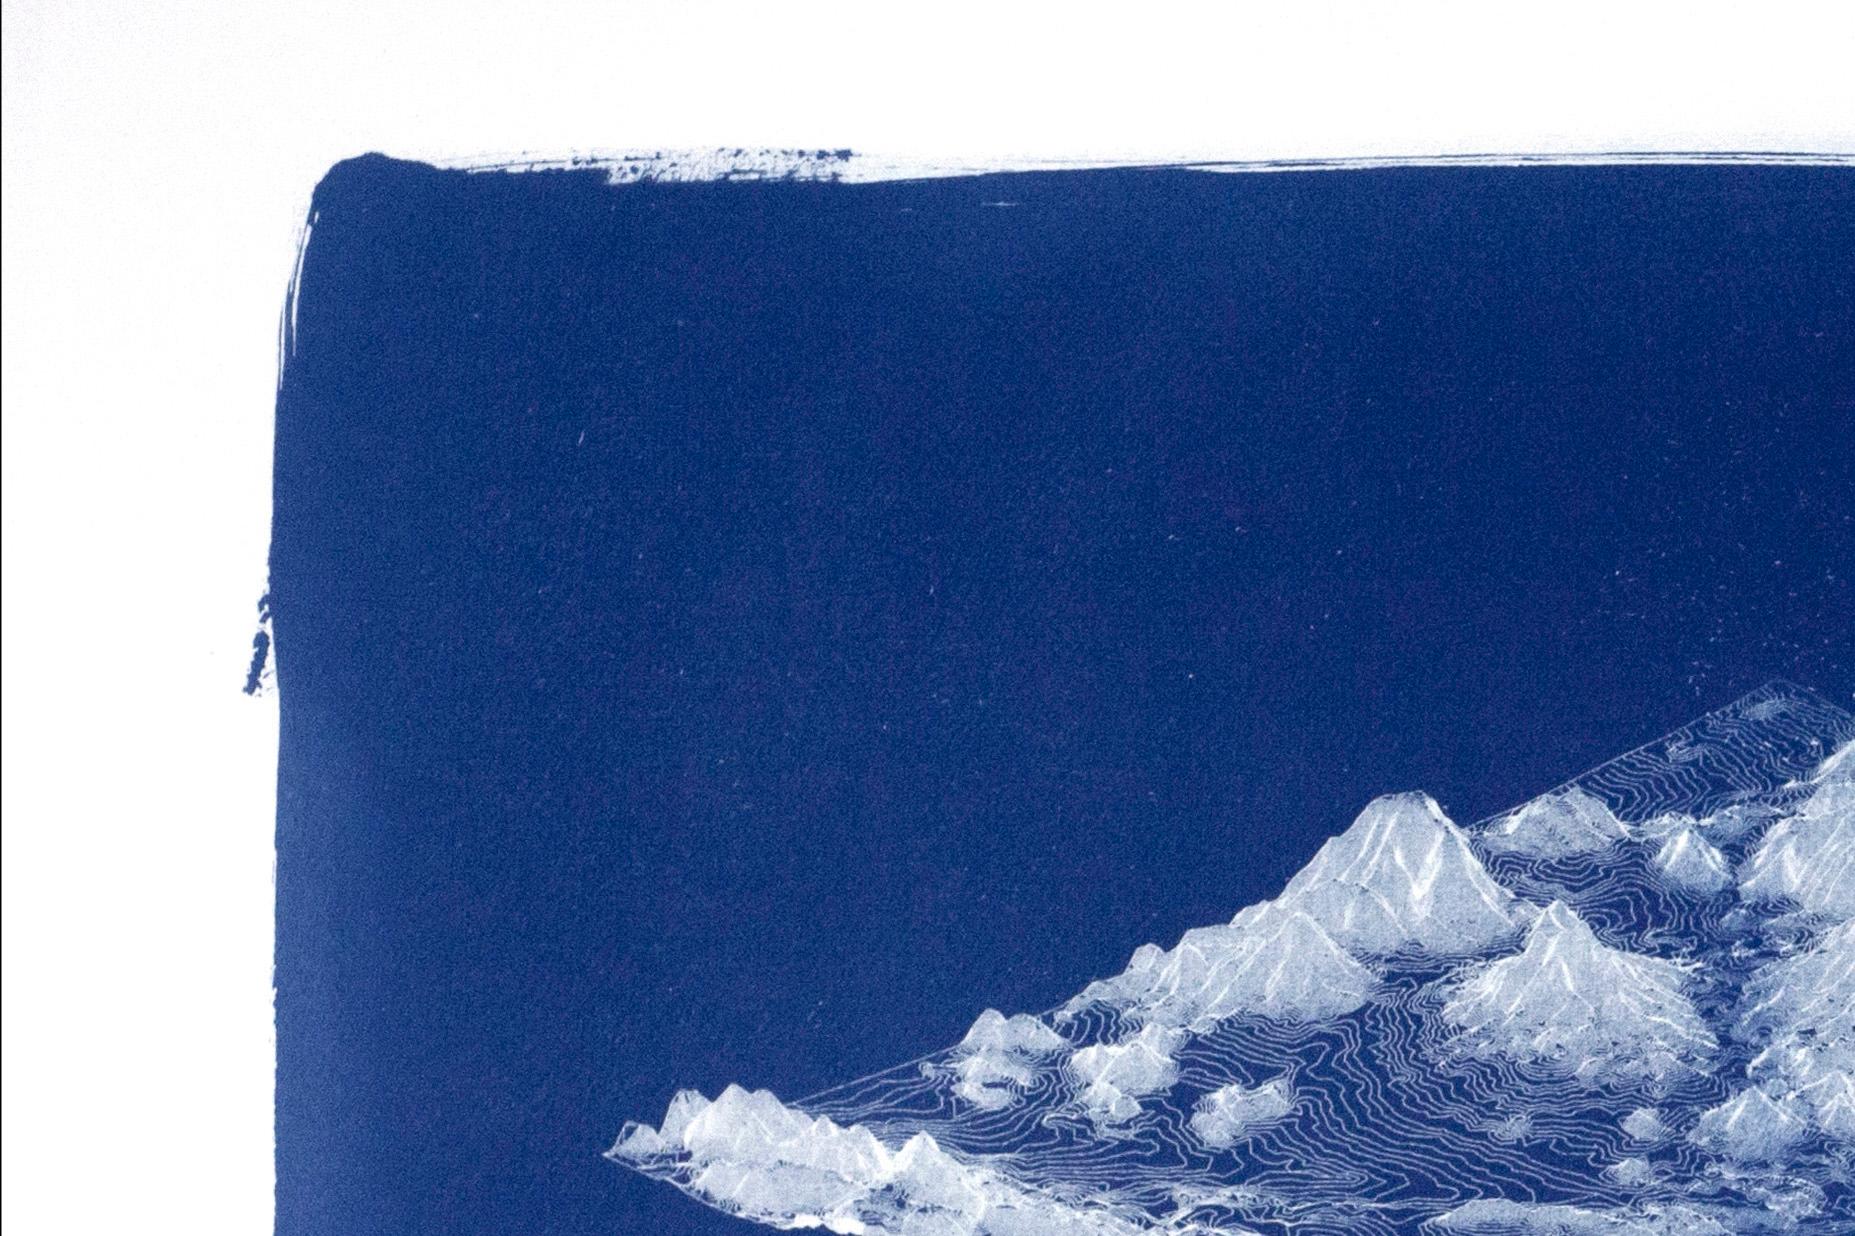 This is an exclusive handprinted limited edition cyanotype.
Contemporary linear cyanotype showing a 3D mountain terrain.

Details:
+ Title: 3D Render Mountain
+ Year: 2021
+ Edition Size: 50
+ Stamped and Certificate of Authenticity provided
+